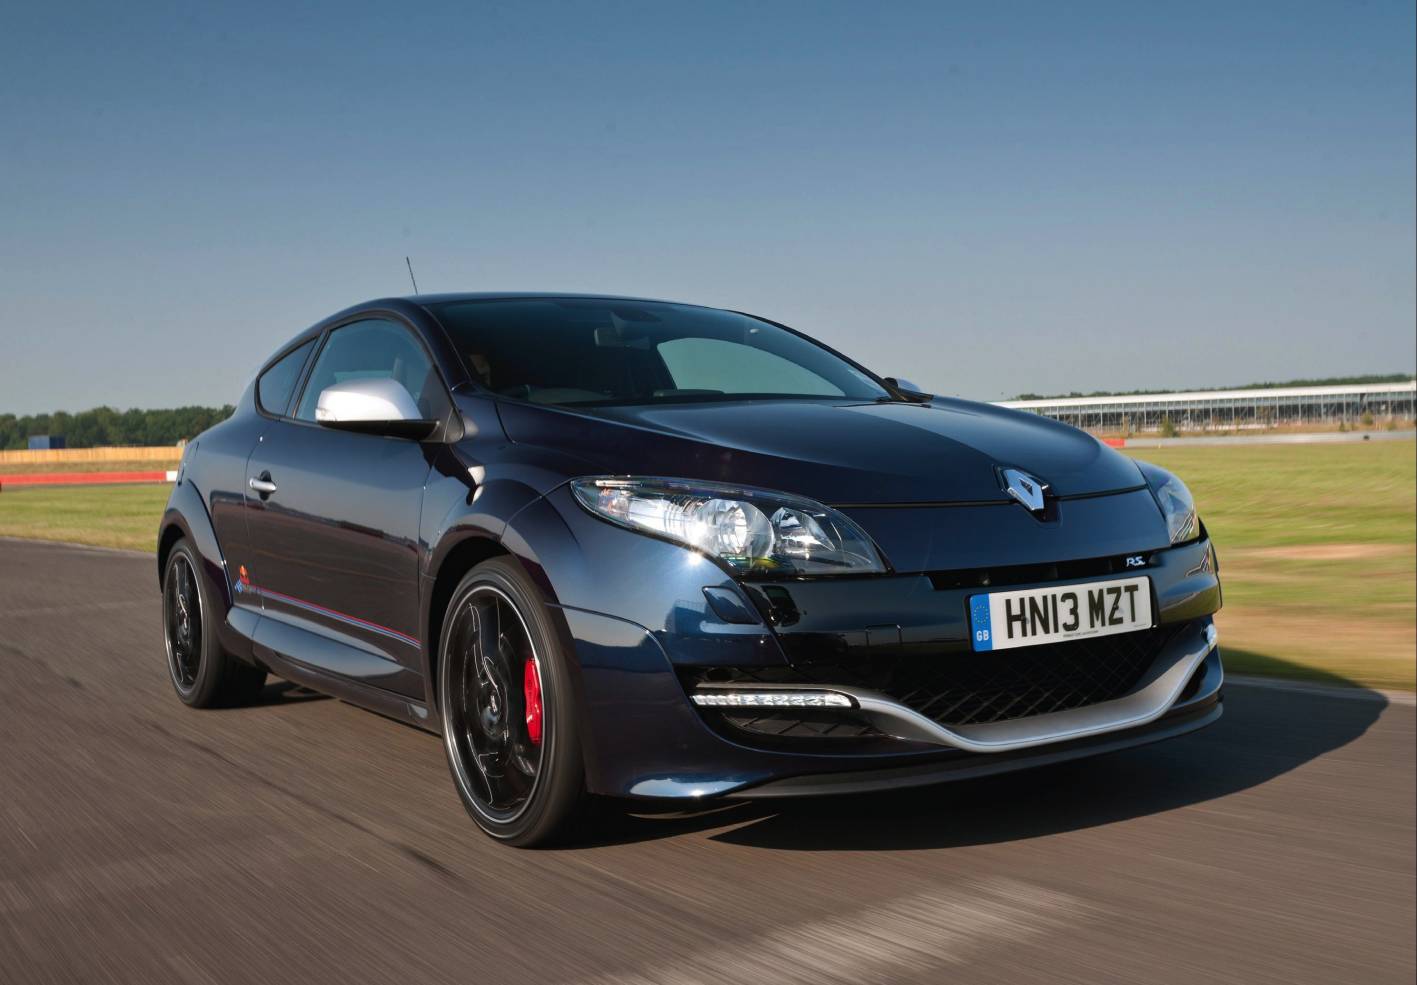 Renault Megane RS 265 RB8 Limited Edition now on sale